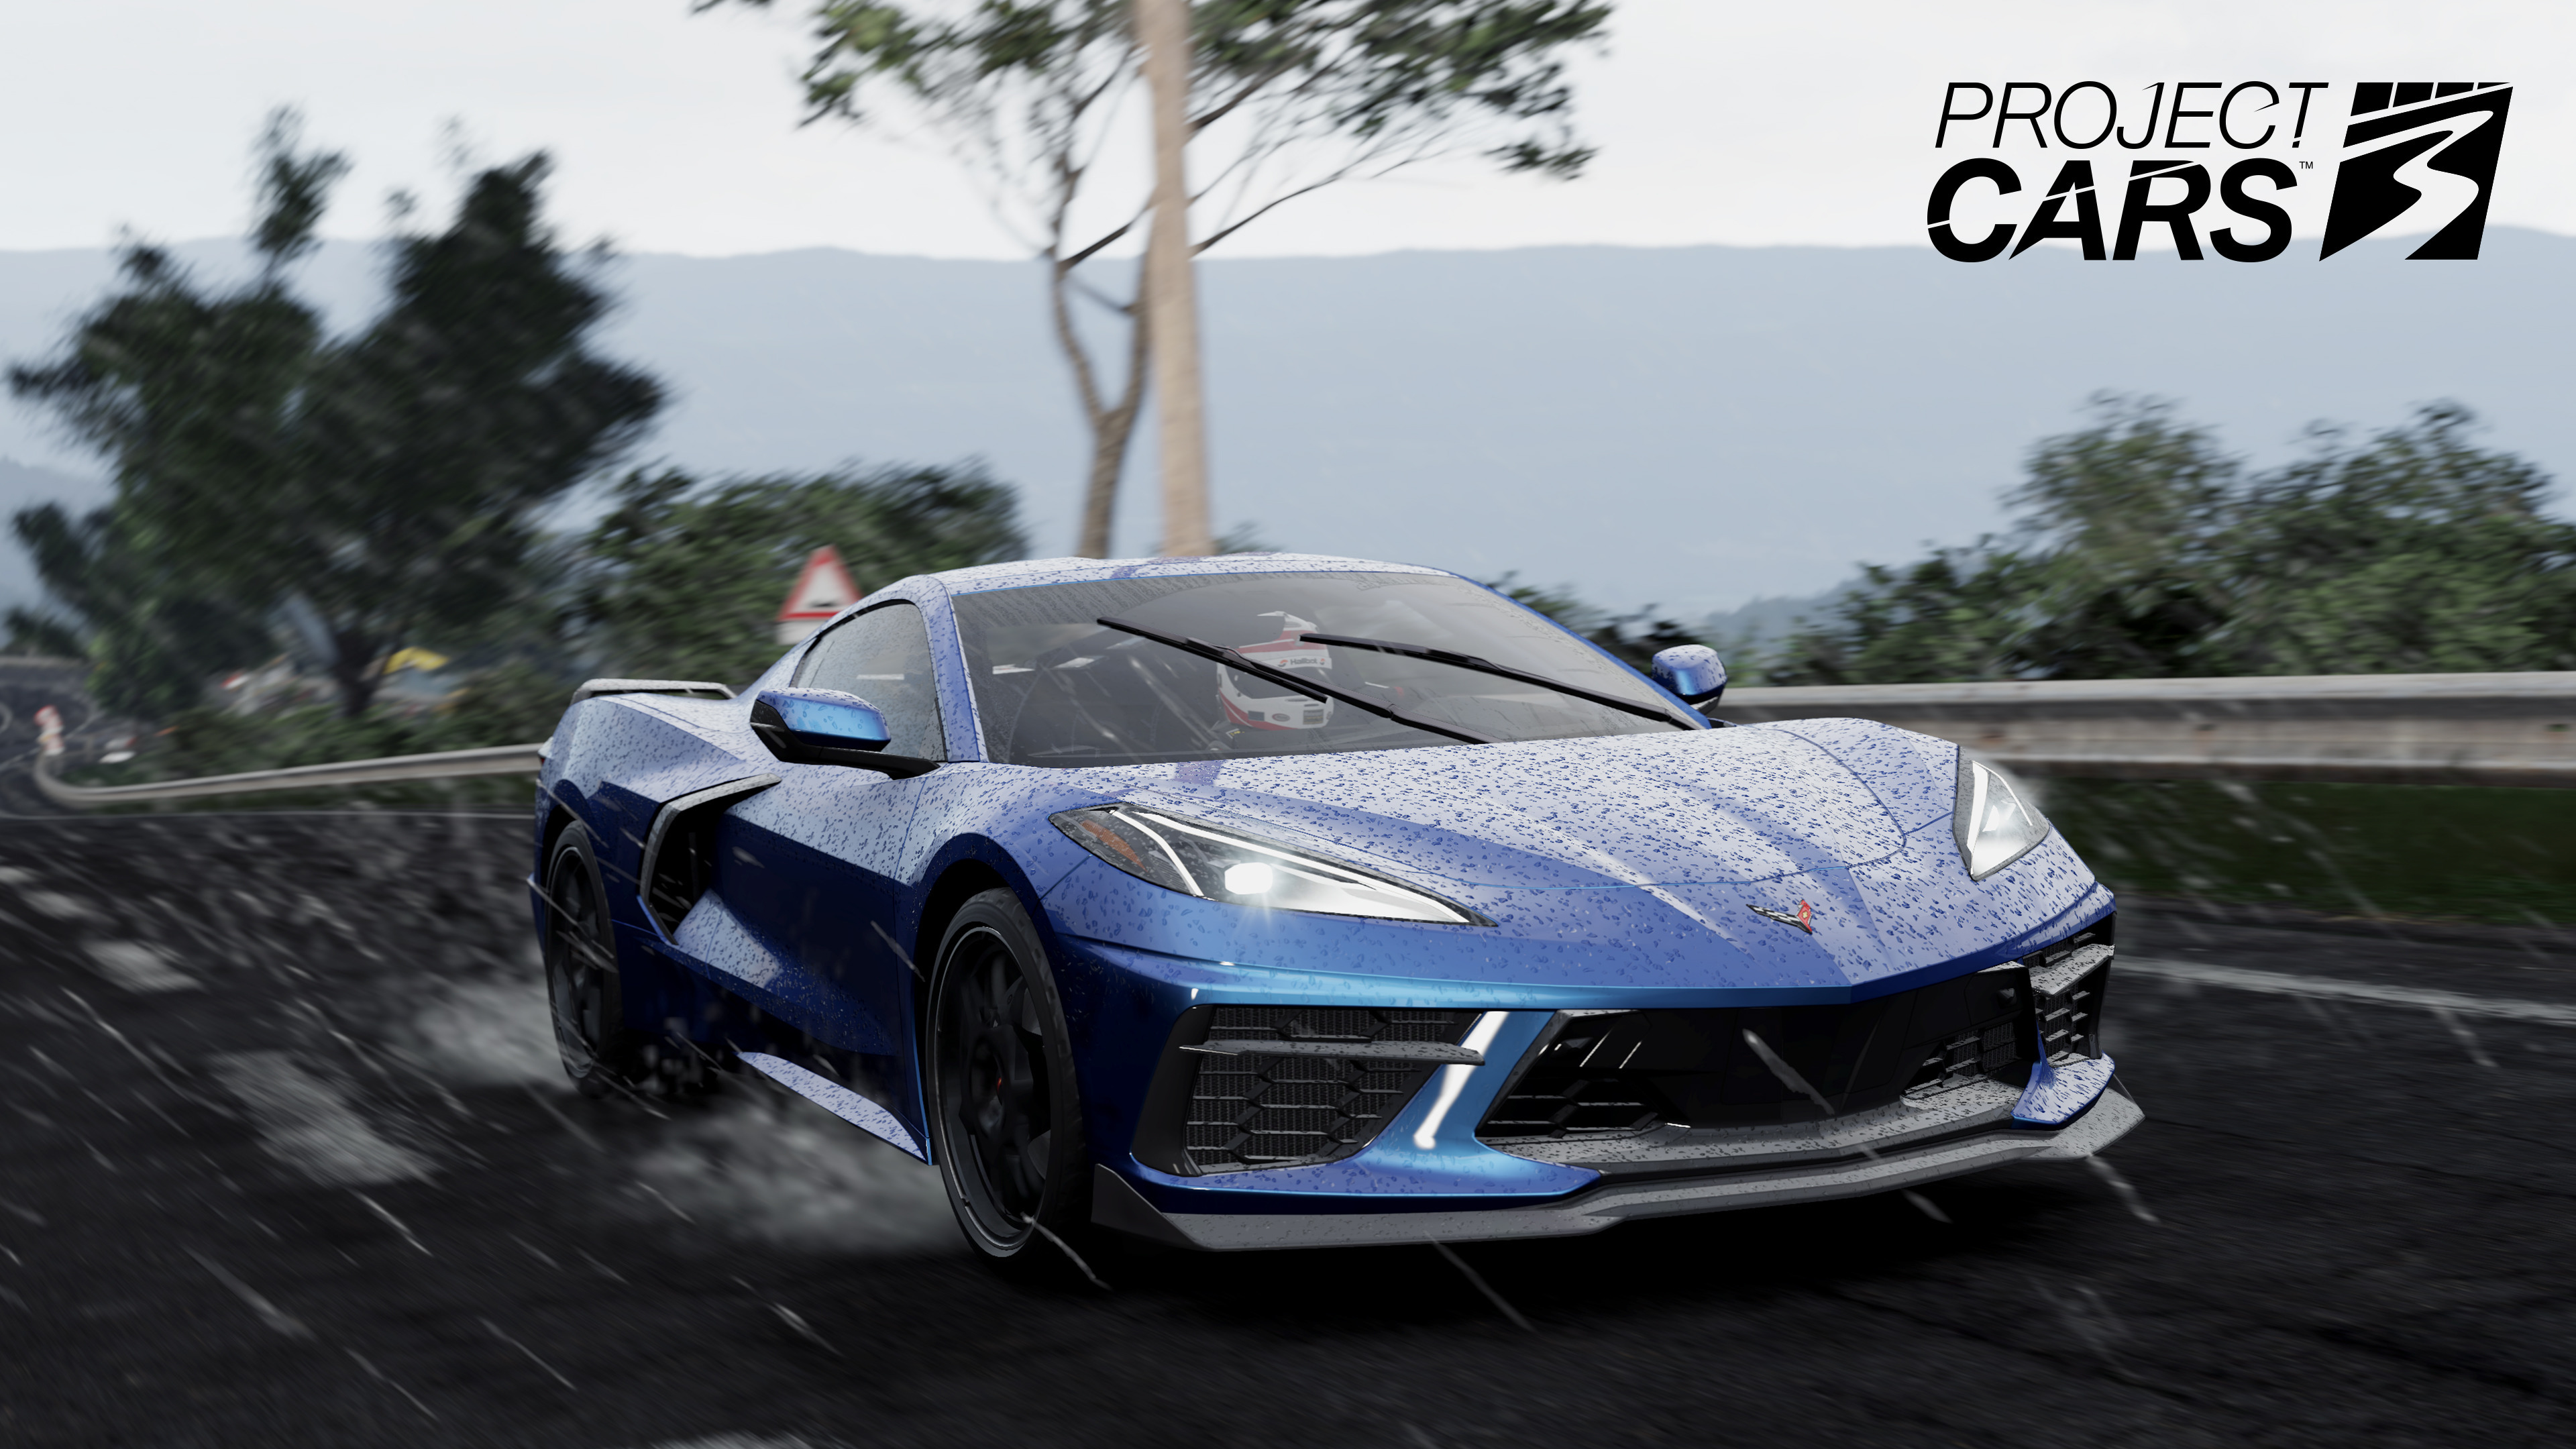 Video Game Project Cars 3 4k Ultra HD Wallpaper